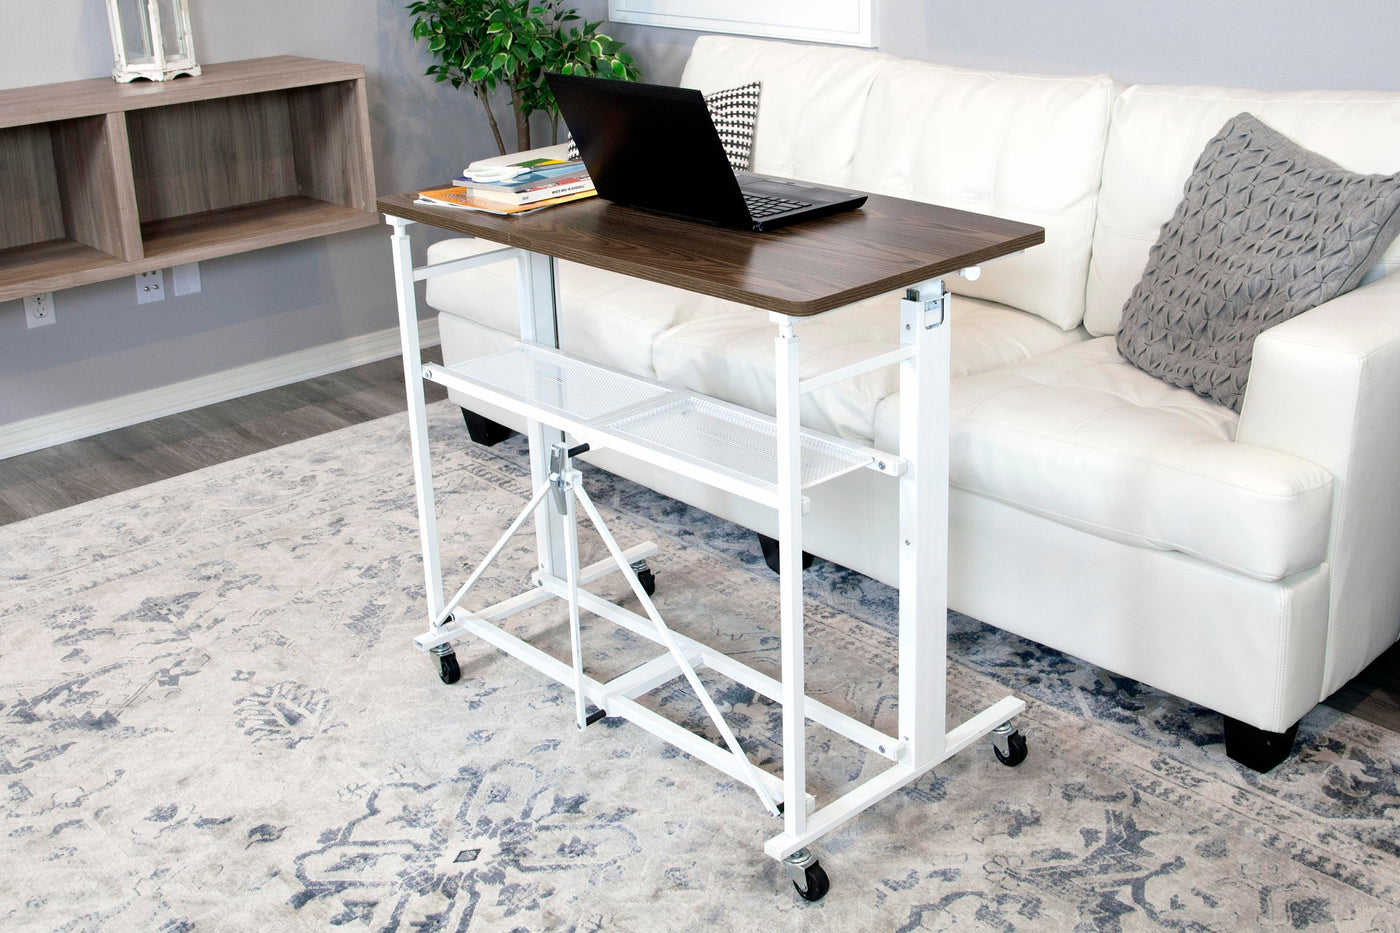 Origami's Adjustable Height Sit to Stand Laptop Computer Desk by UP2U